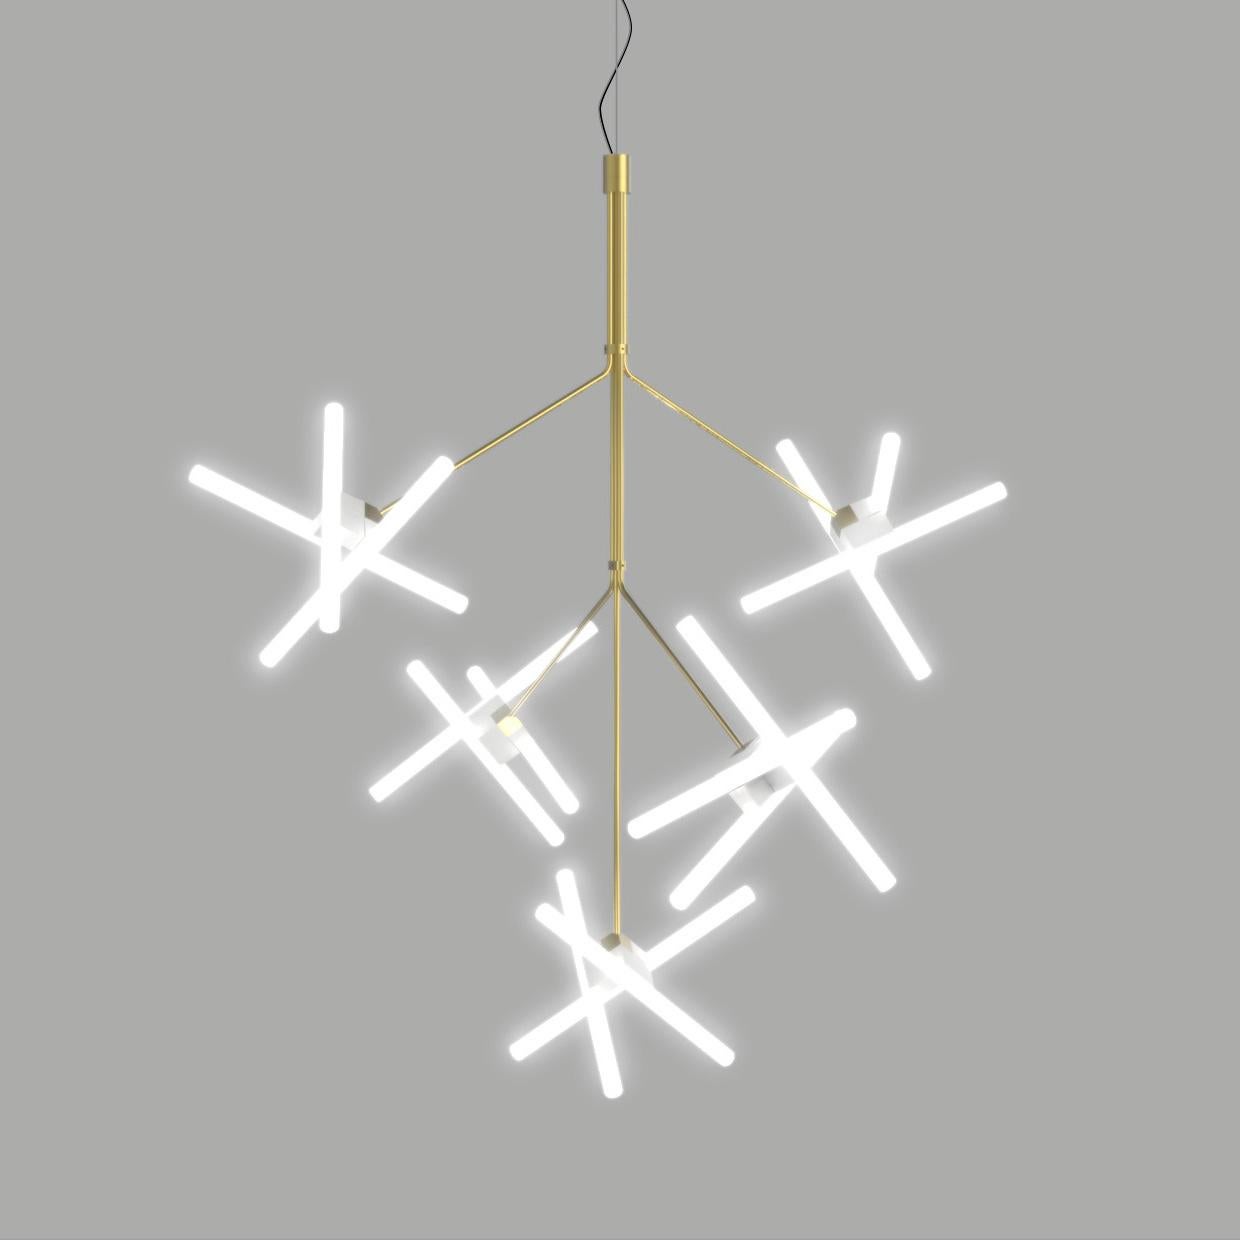 Olvidada chandelier lamp designed by Pepe Cortes.
Manufactured by BD Barcelona 

Steel structure and lamp holder nucleas with a brass scotch polished finish. Linestras 9W LED.
Linestras 9W LED S14D 3x9W LED suitable for 110 v. and v 220.